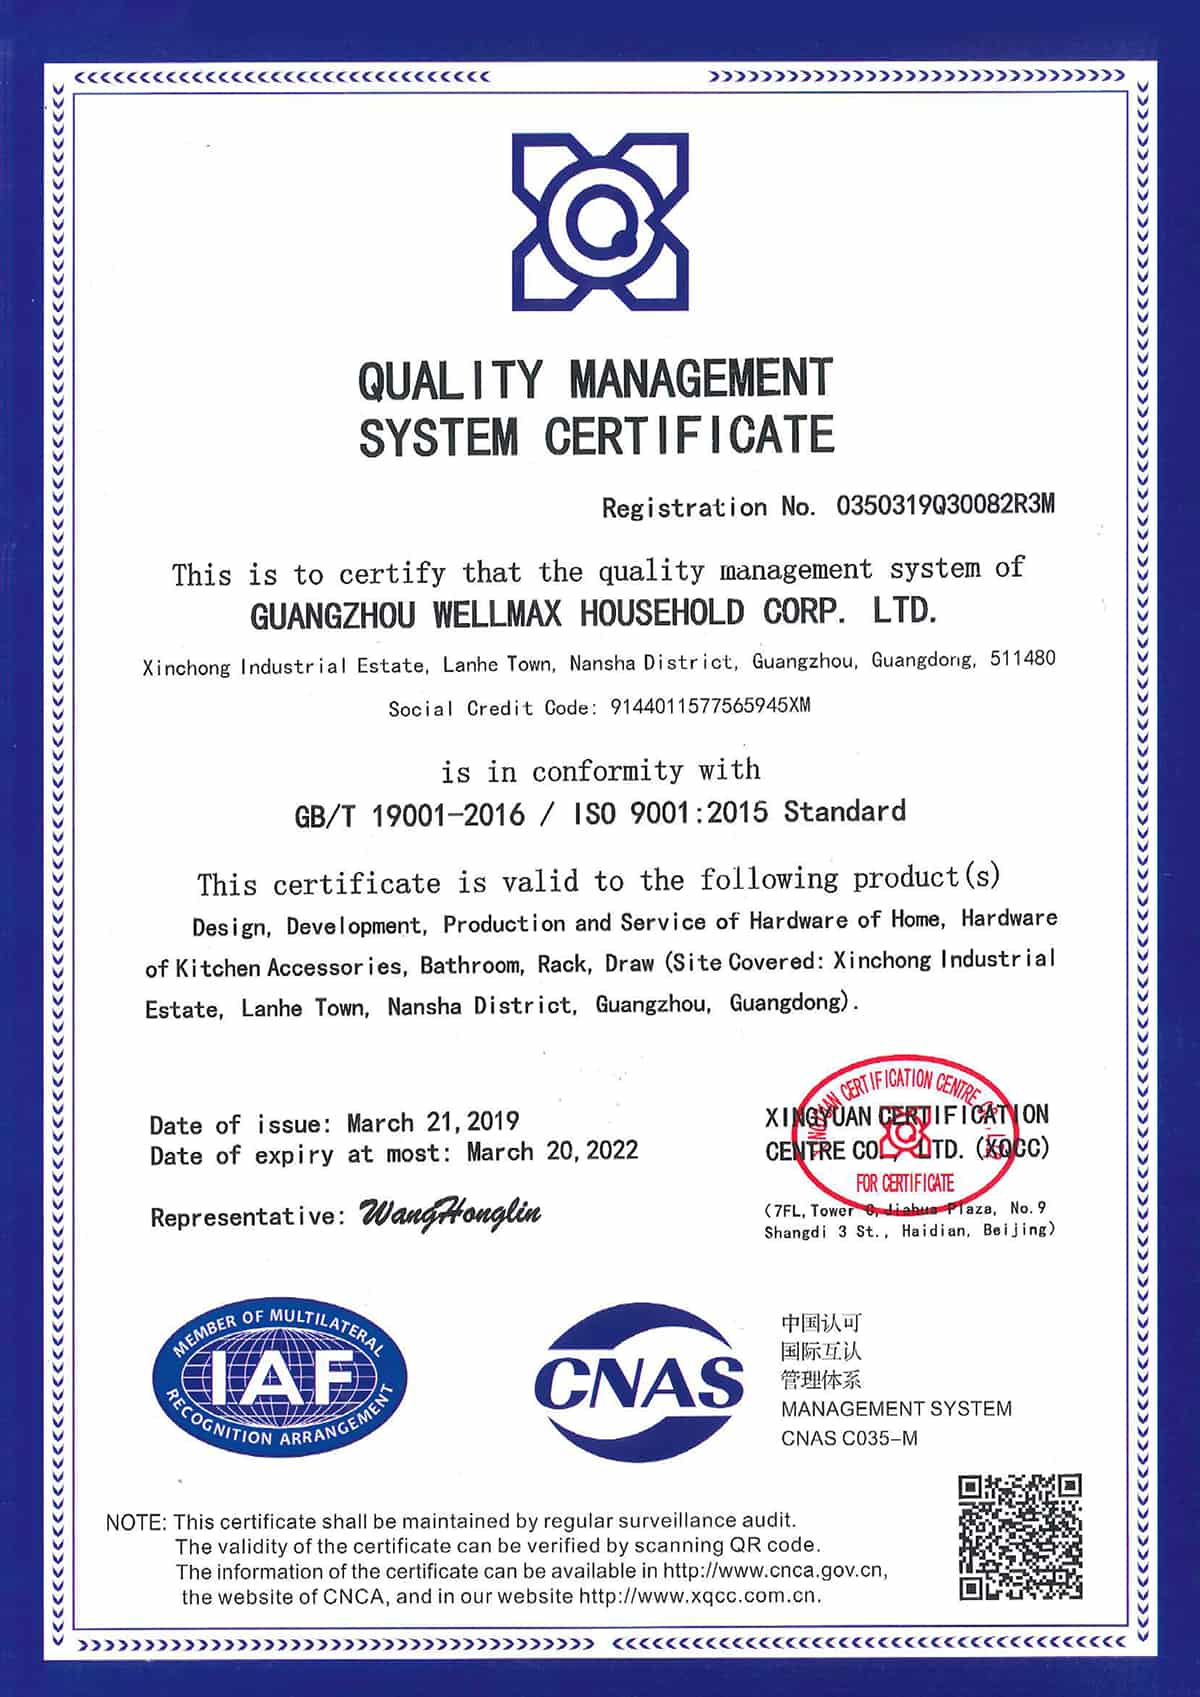 Quality Management System Certificate 2020